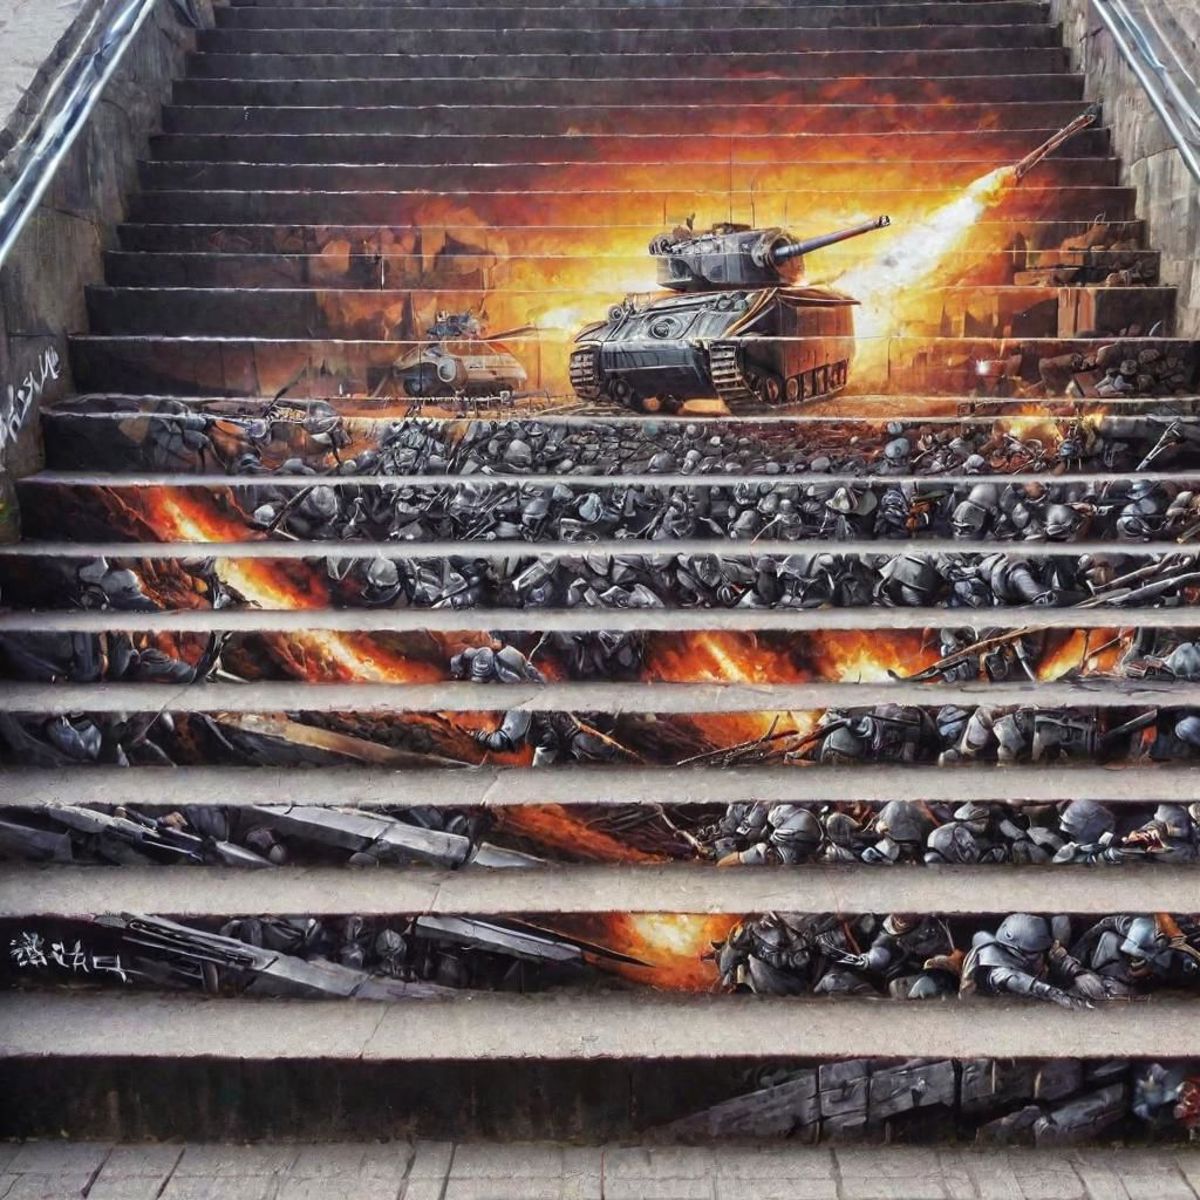 Stair Art XL image by nocor1i8